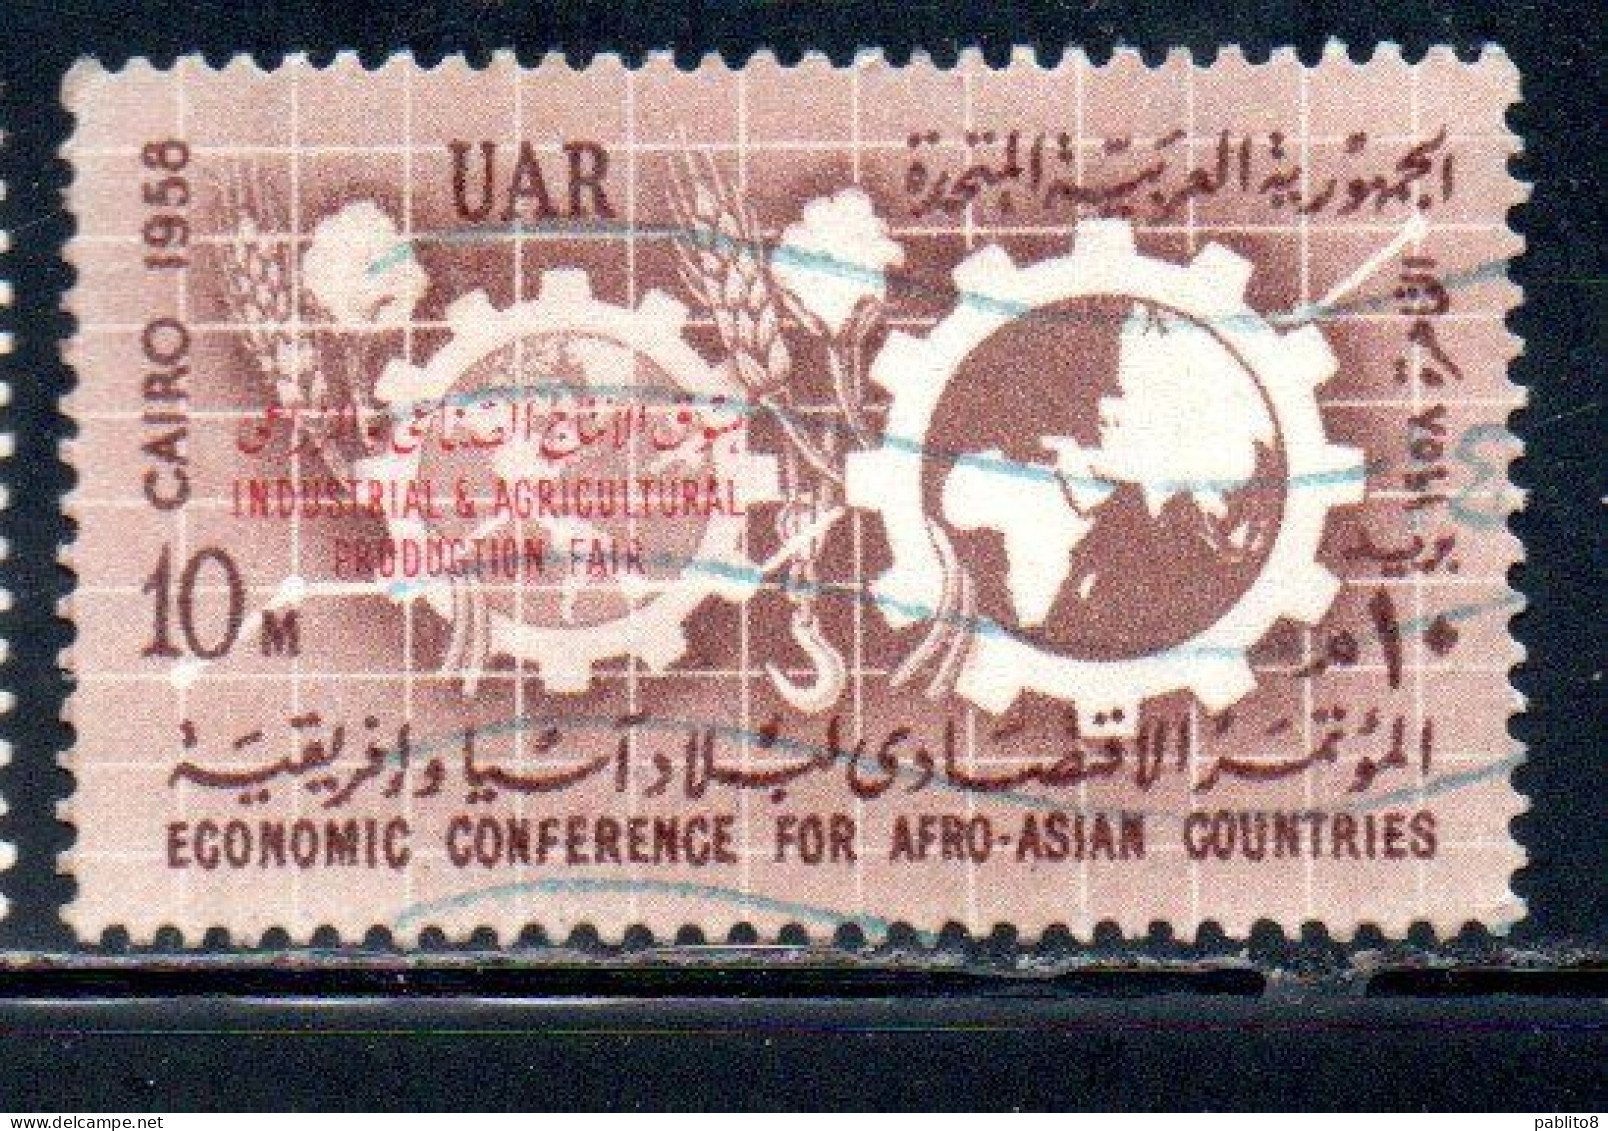 UAR EGYPT EGITTO 1958 OVERPRINTED INDUSTRIAL AND AGRICULTURAL PRODUCTION FAIR CAIRO 10m USED USATO OBLITERE' - Oblitérés